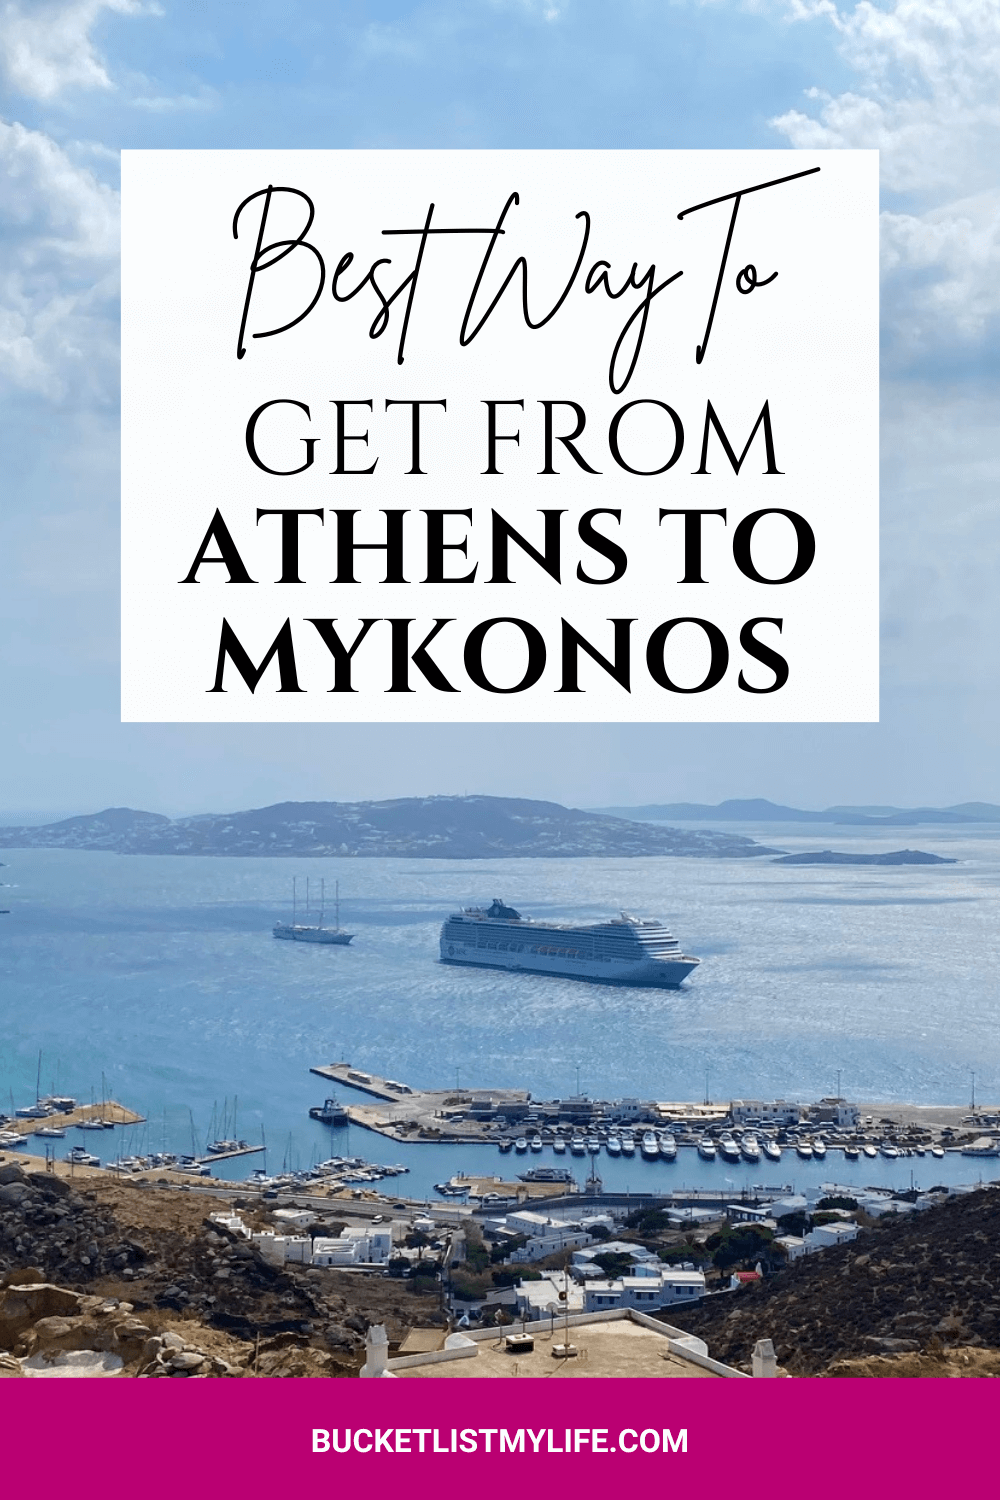 Choose the Best way to get from Athens to Mykonos